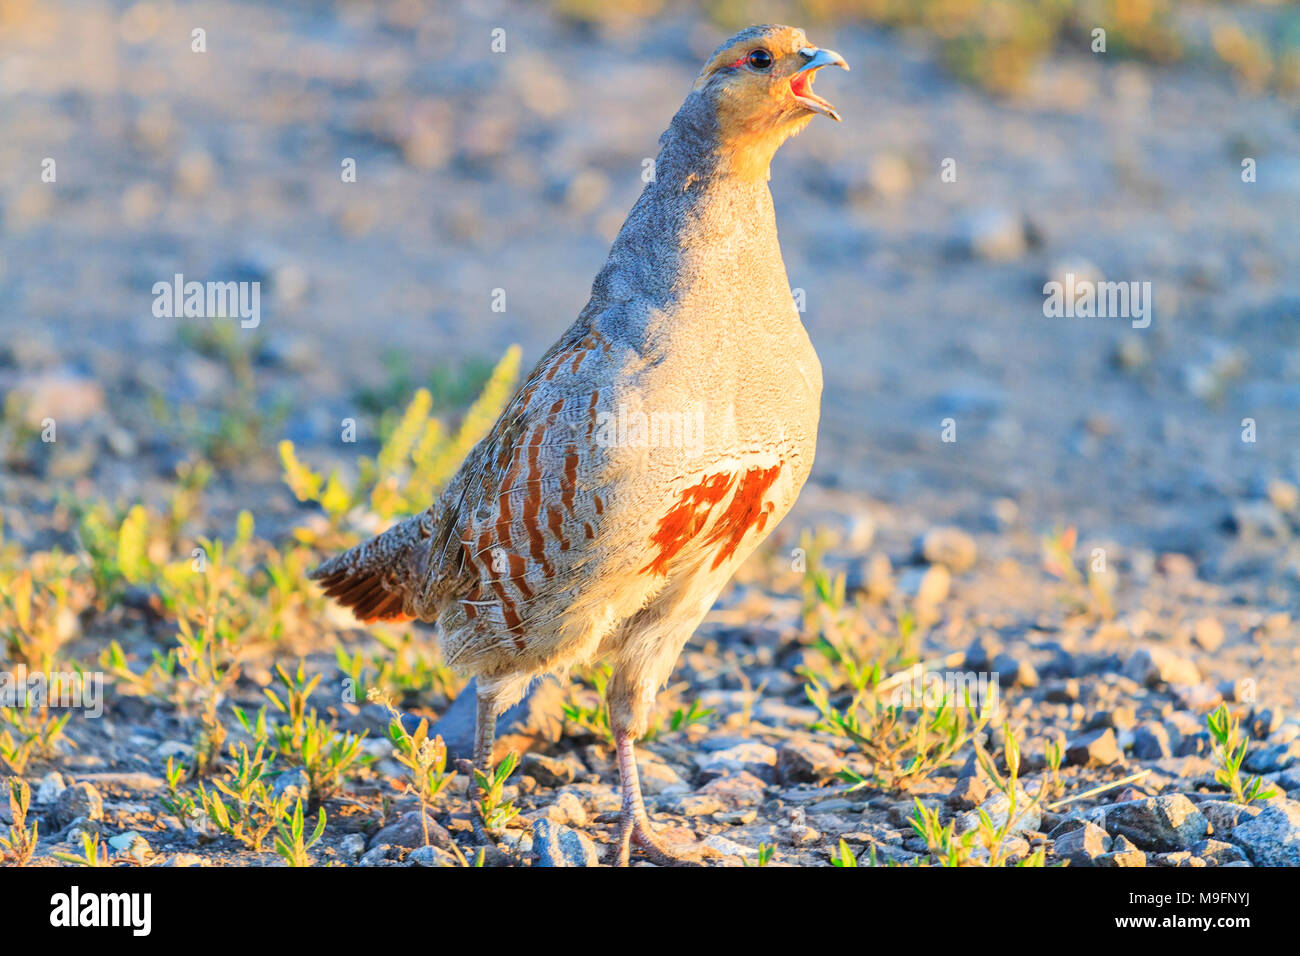 Gray partridge sings a song in the summer morning, birds, wildlife and season change Stock Photo